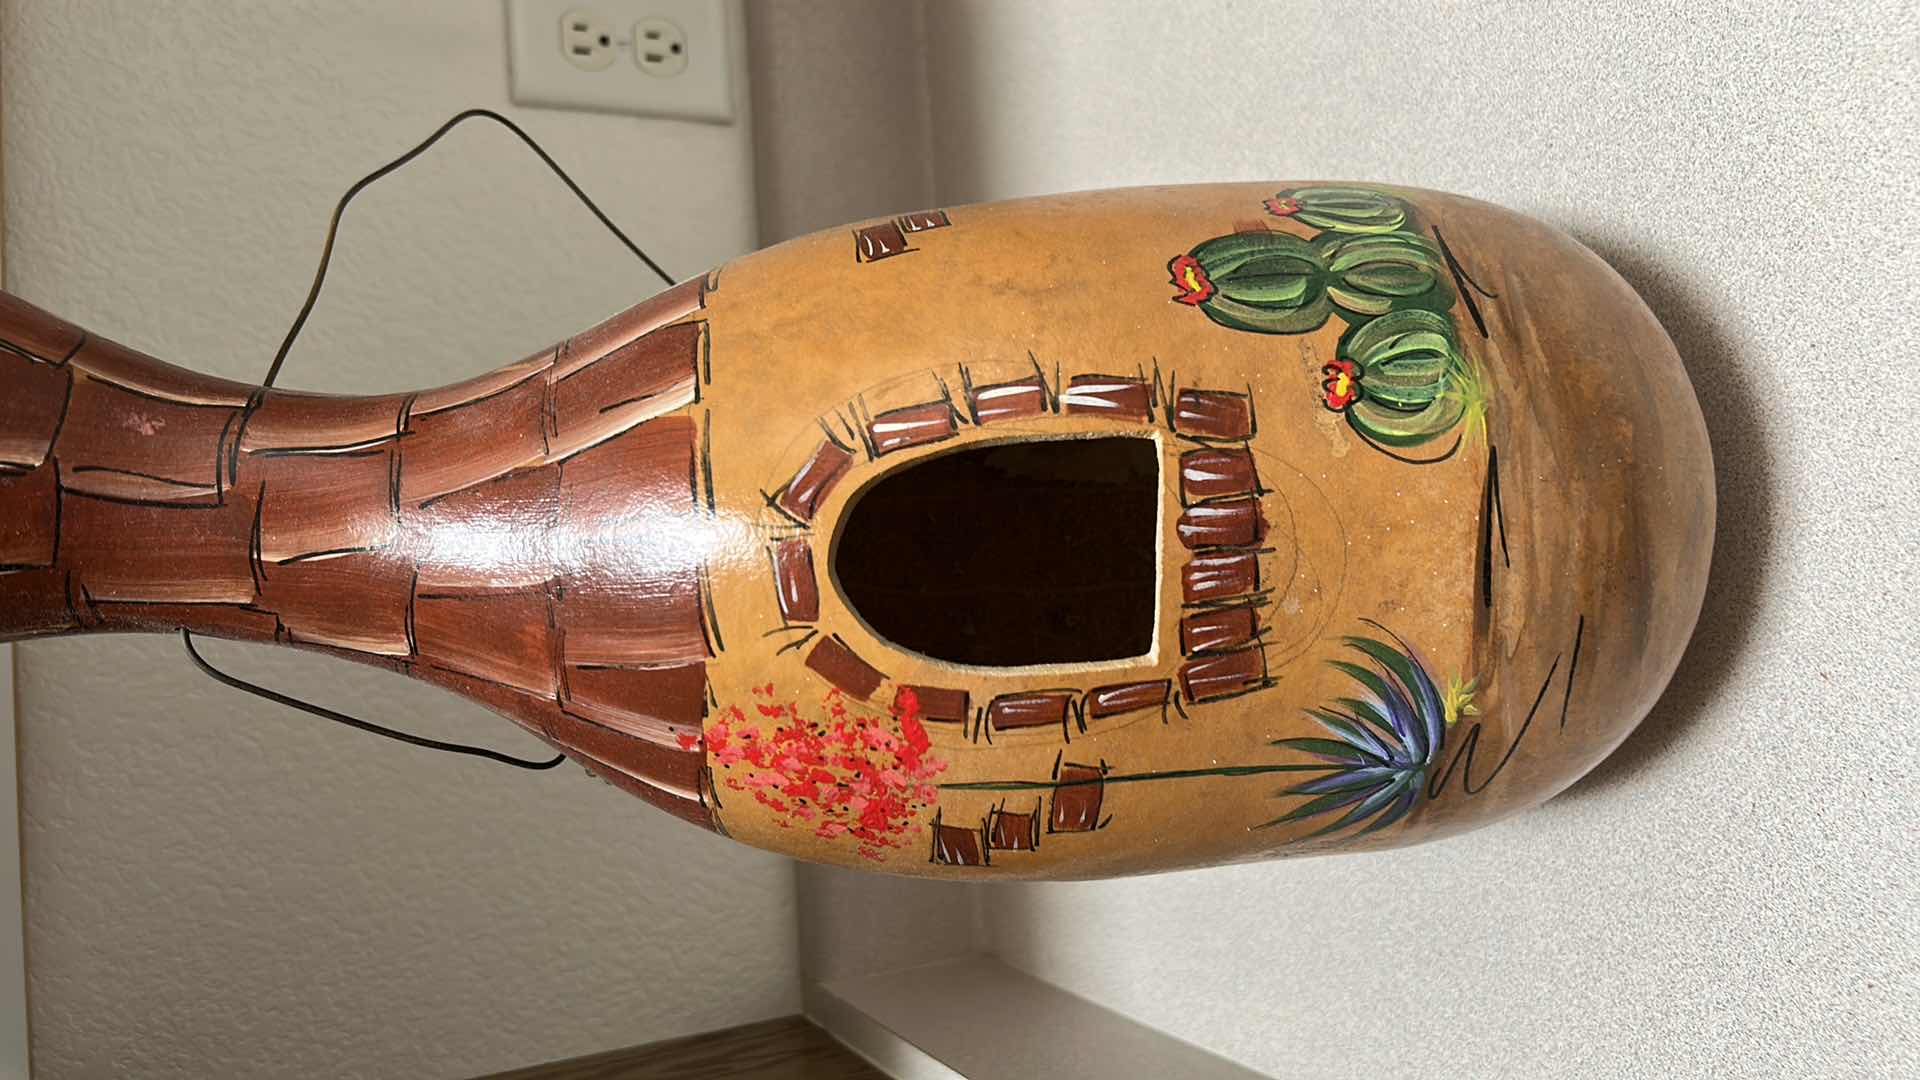 Photo 2 of 2 LARGE HANDPAINTED SIGNED GOURDS JONA